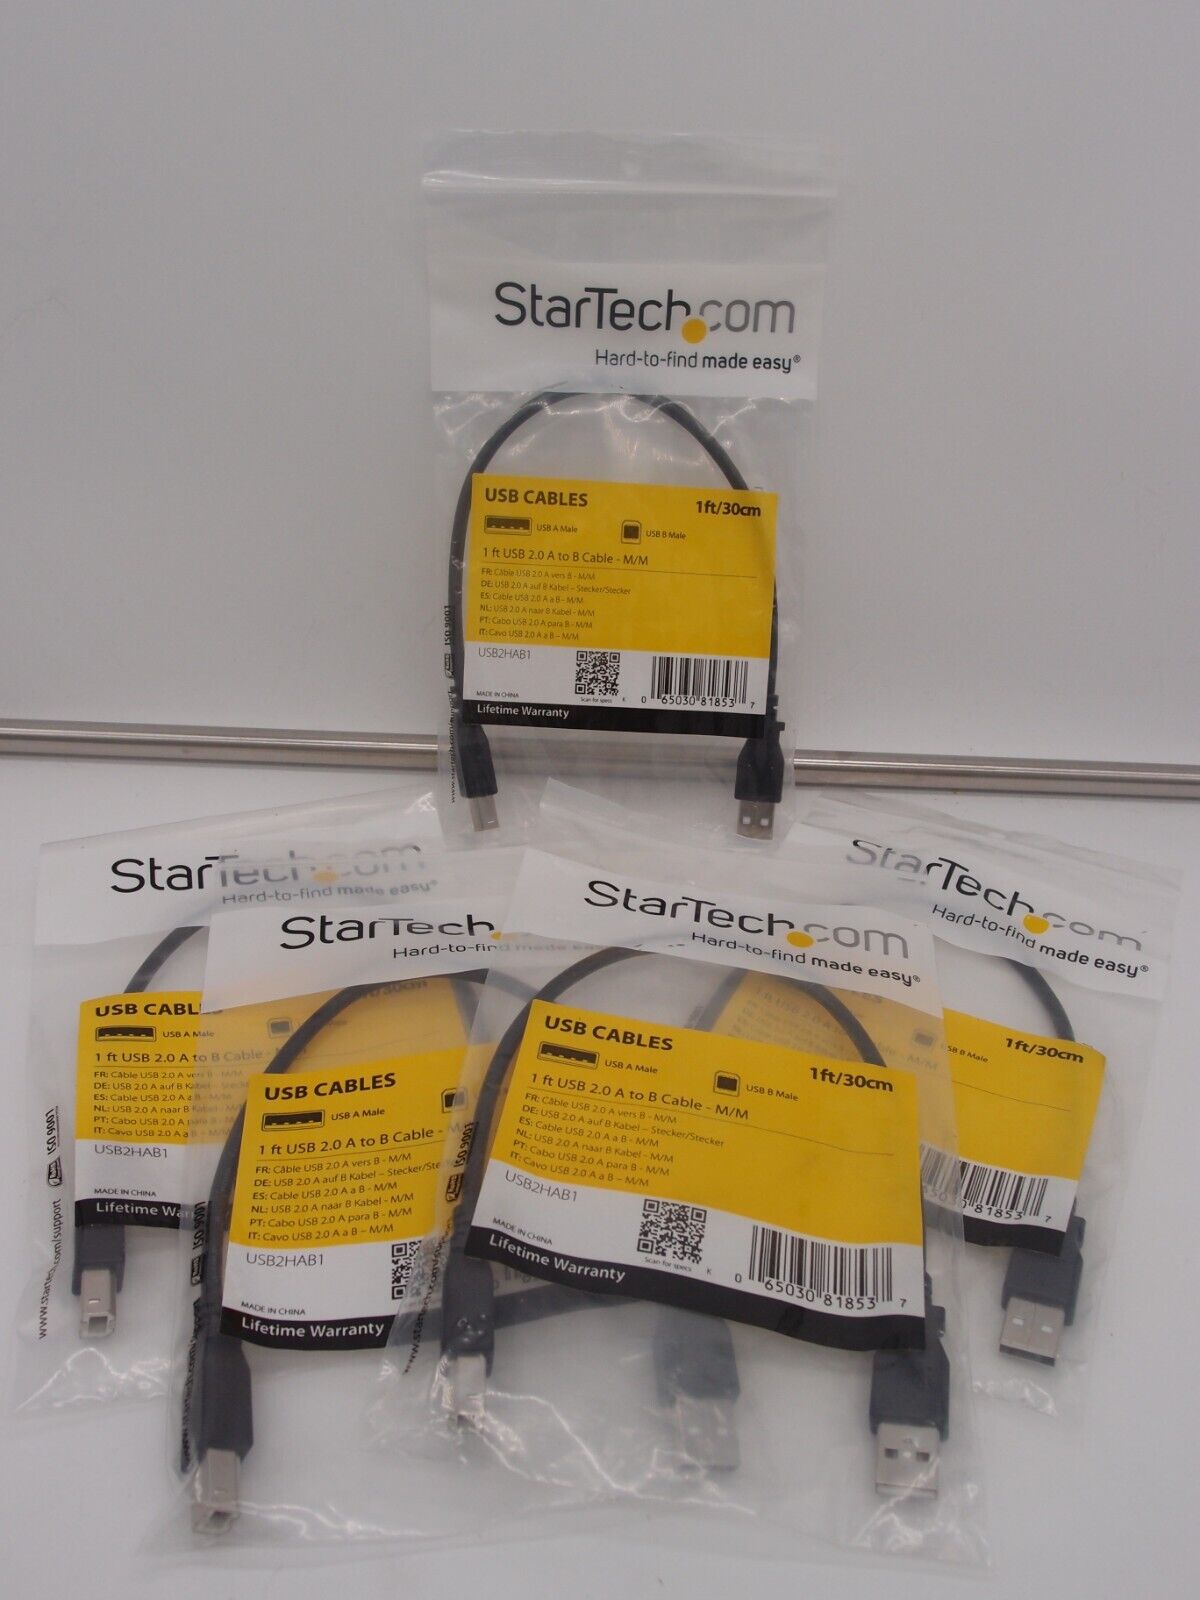 StarTech 1' USB 2.0 A to B CABLE M/M